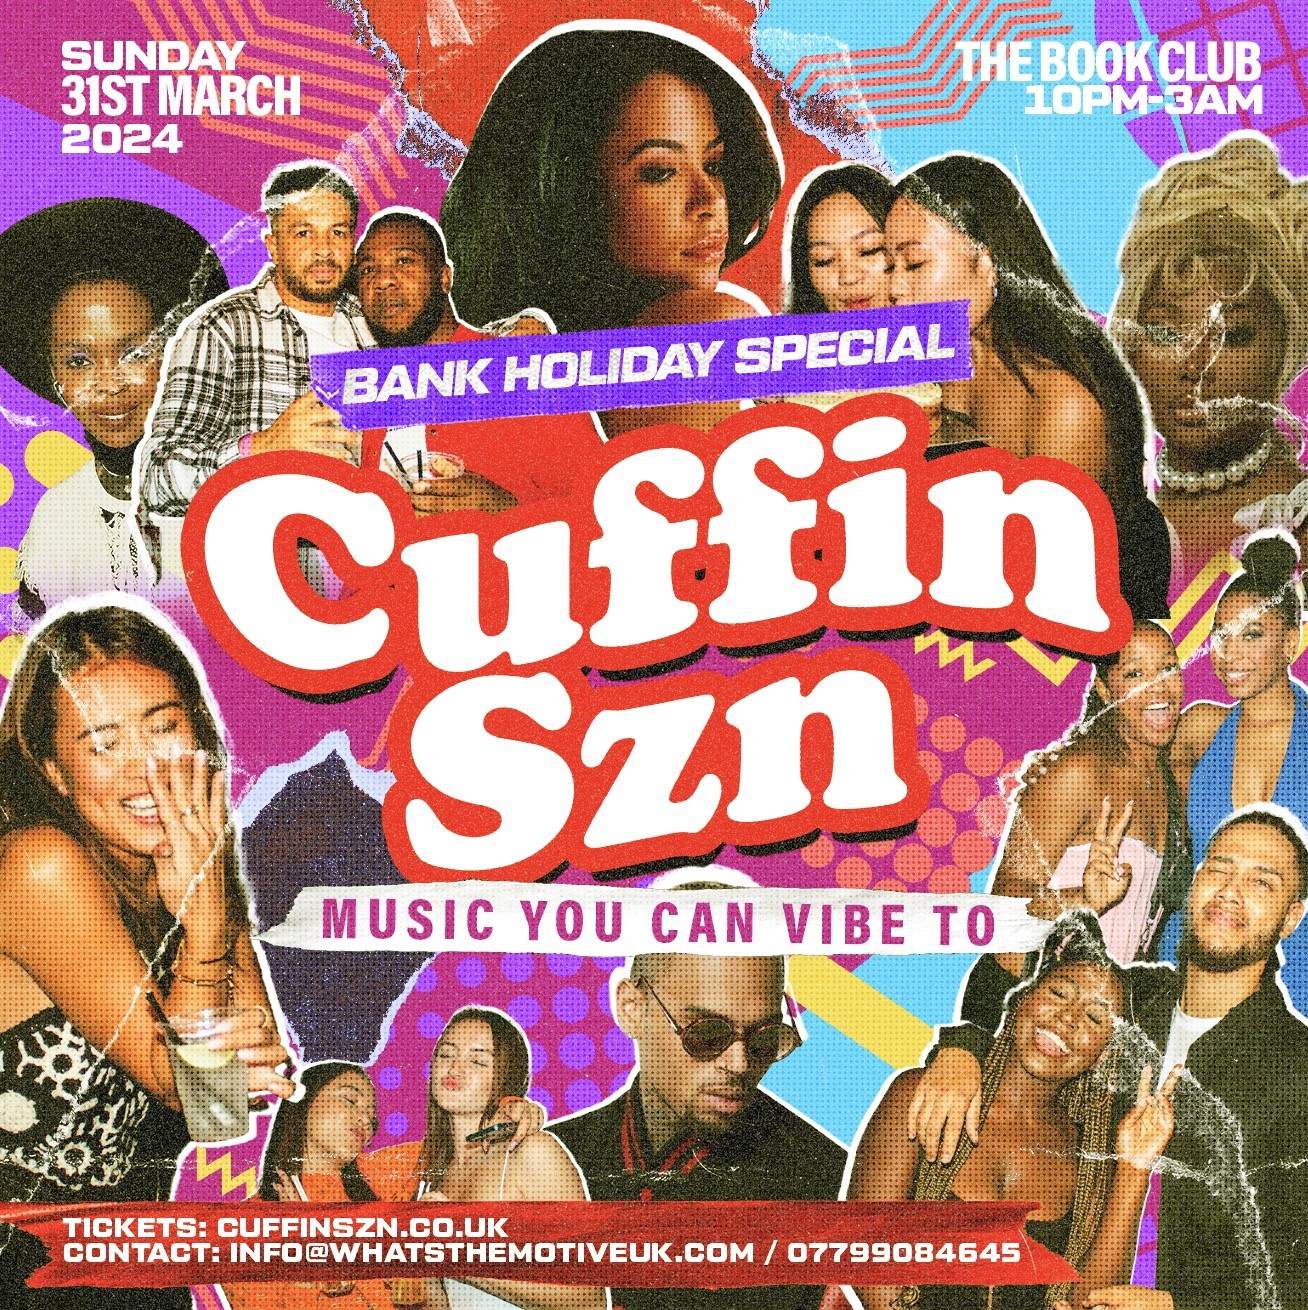 CUFFIN SZN - RnB, HipHop & Afrobeats for u to vibe to - Página trasera